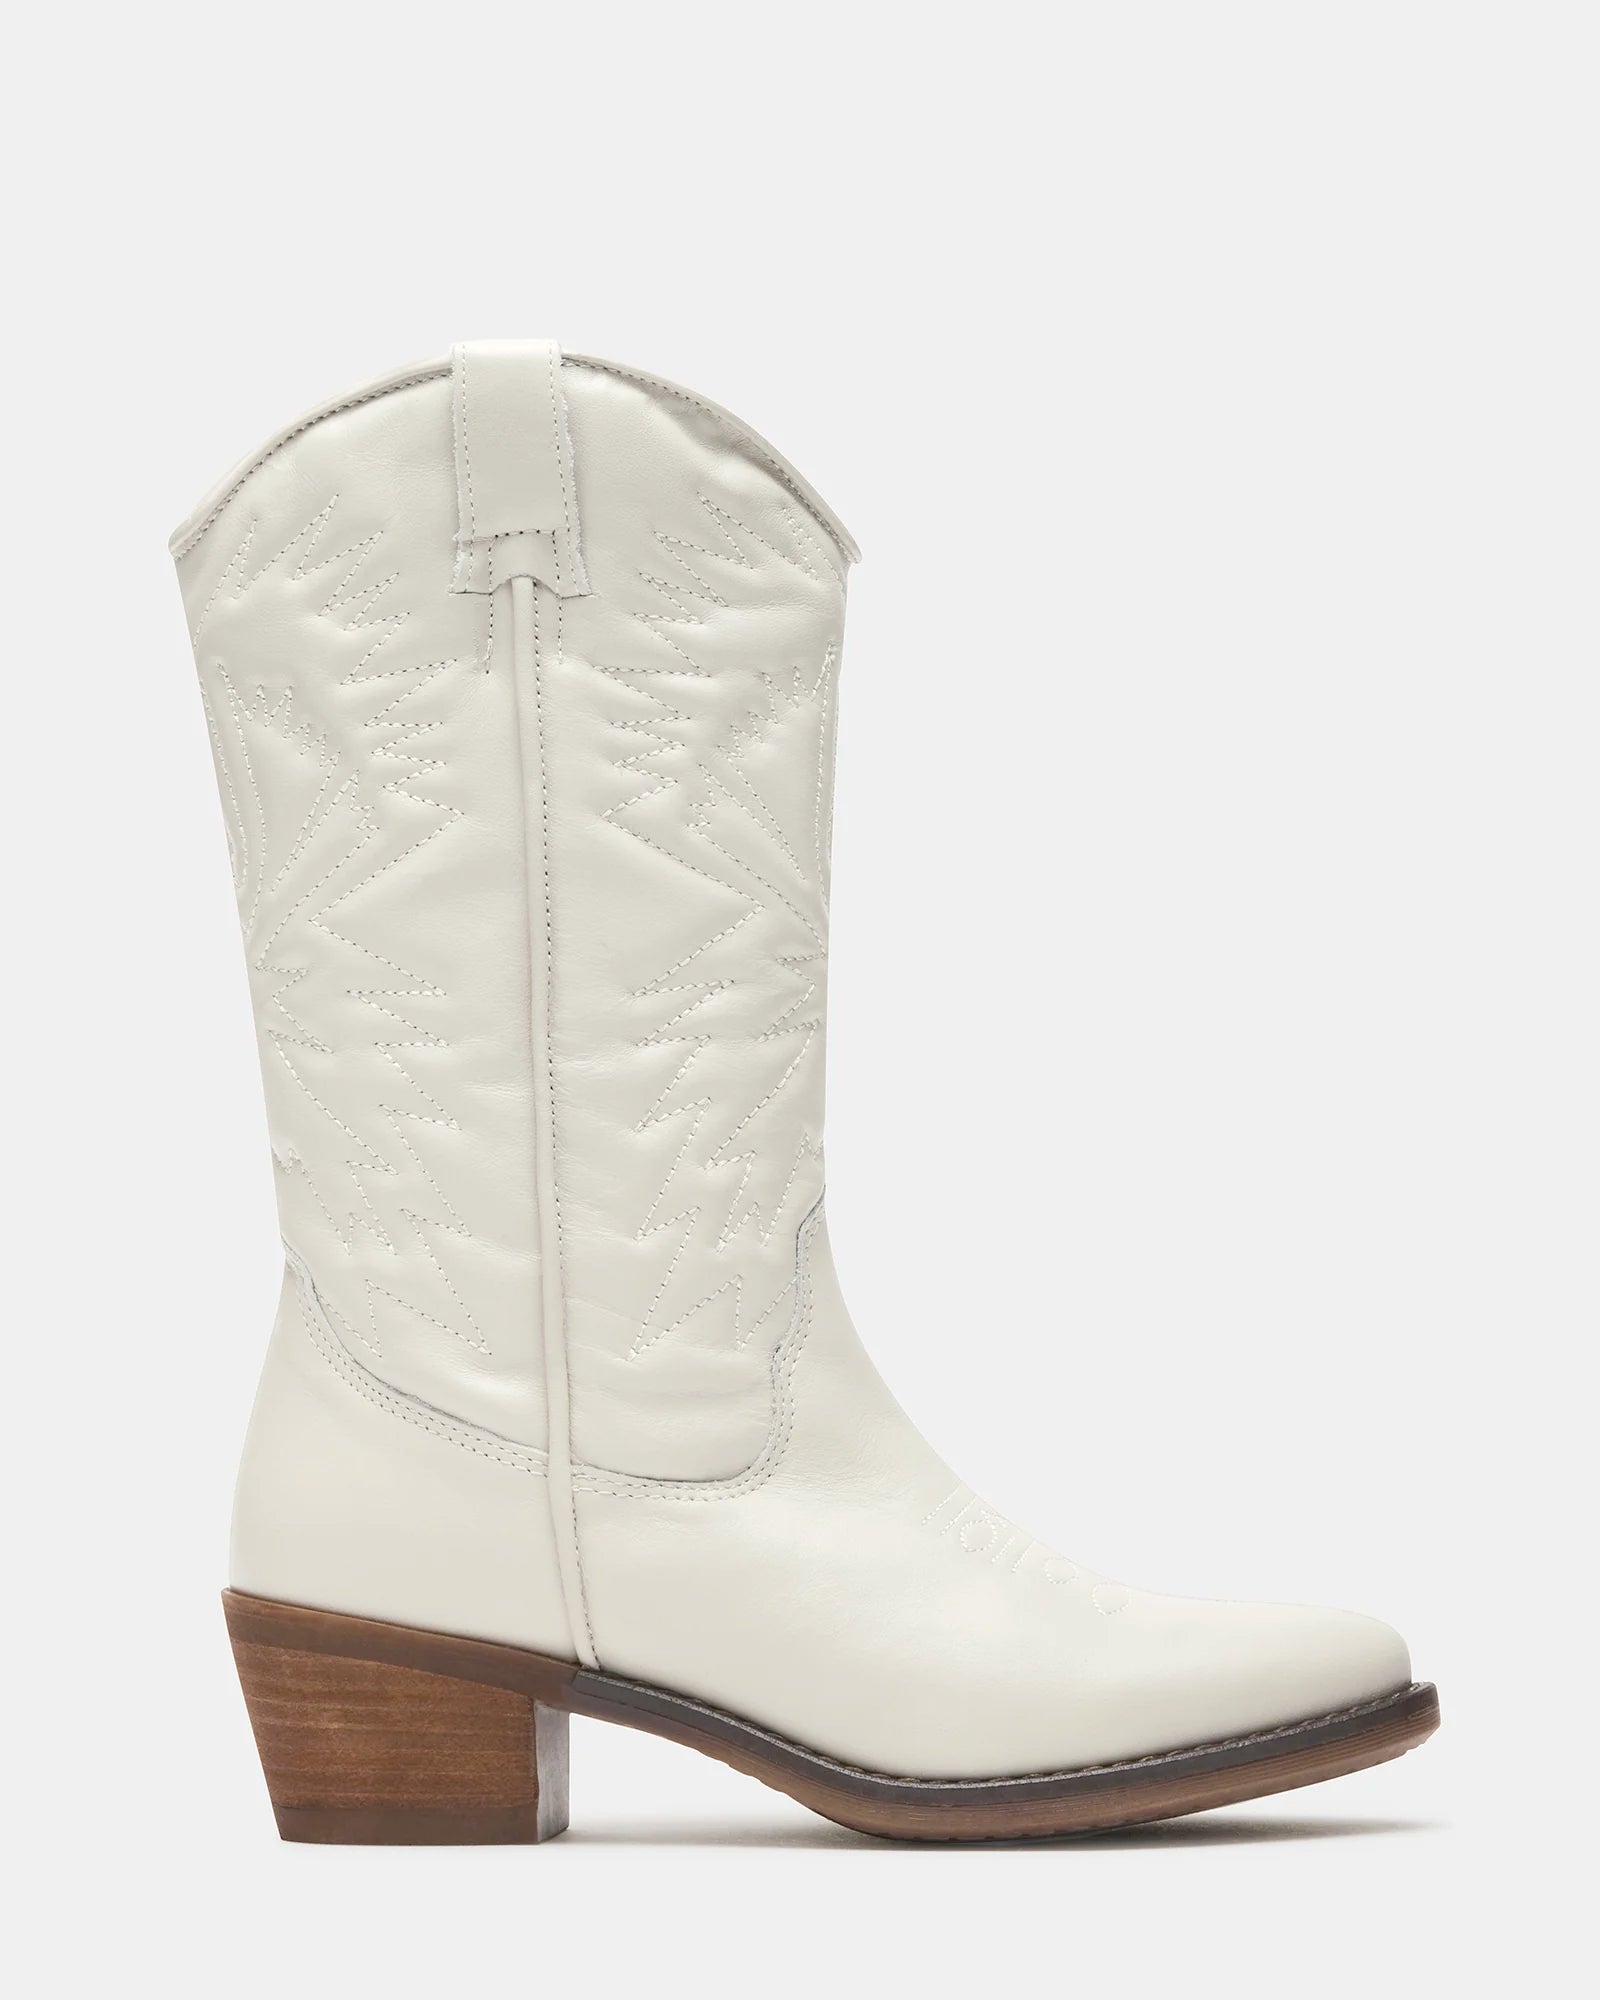 HAYWARD White Leather Western Boots | Women's Leather Cowboy Boots ...